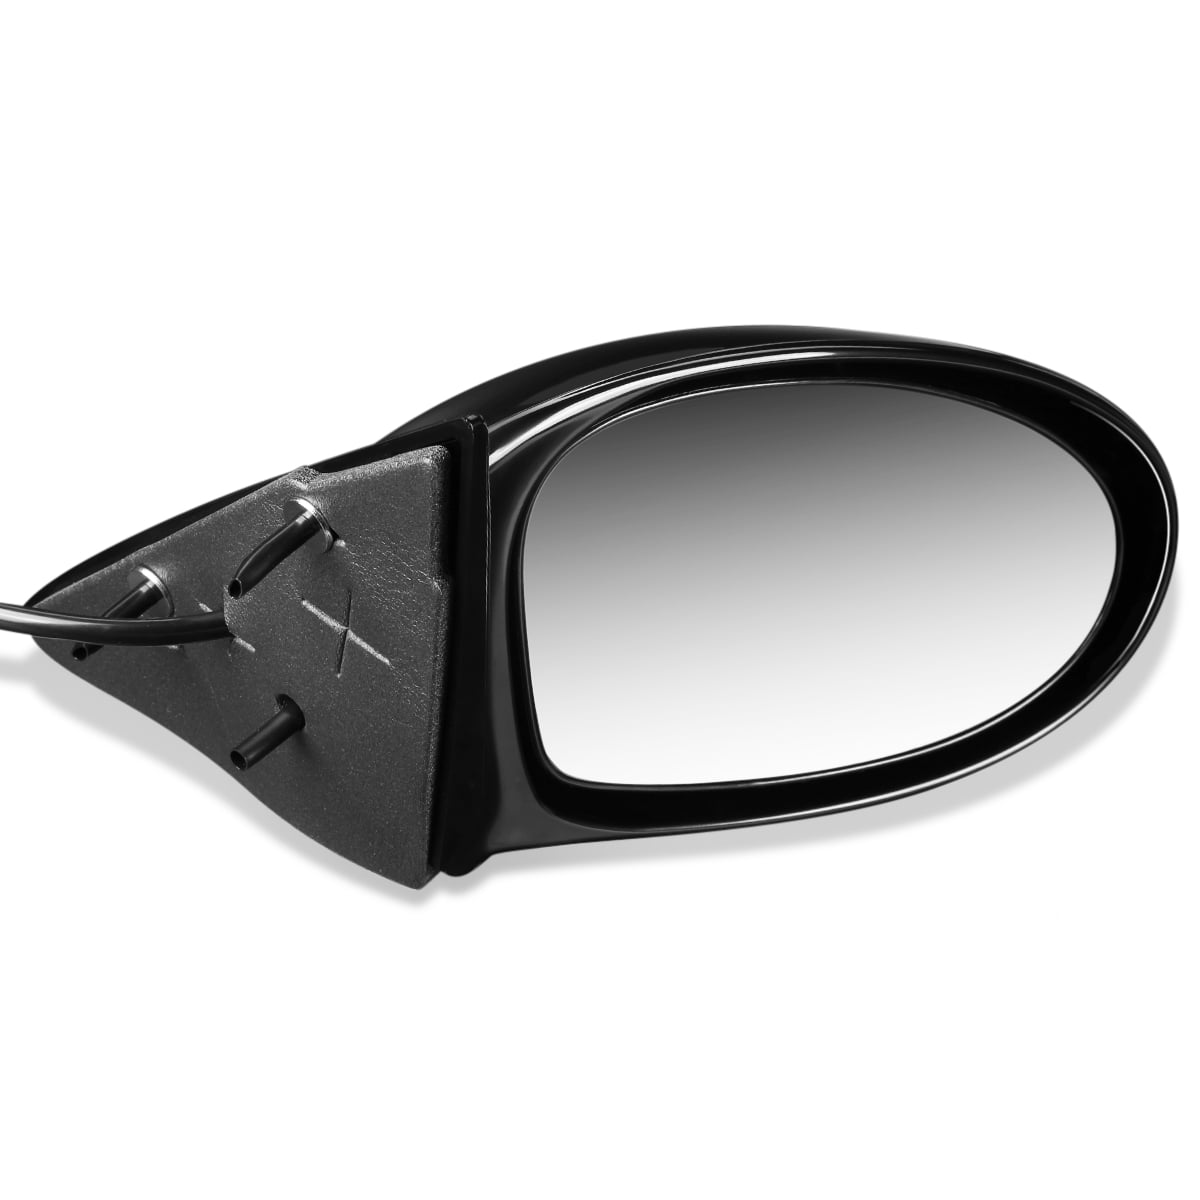 DNA Motoring OEM-MR-FO1321210 Factory Style Powered Right Side Door Mirror 